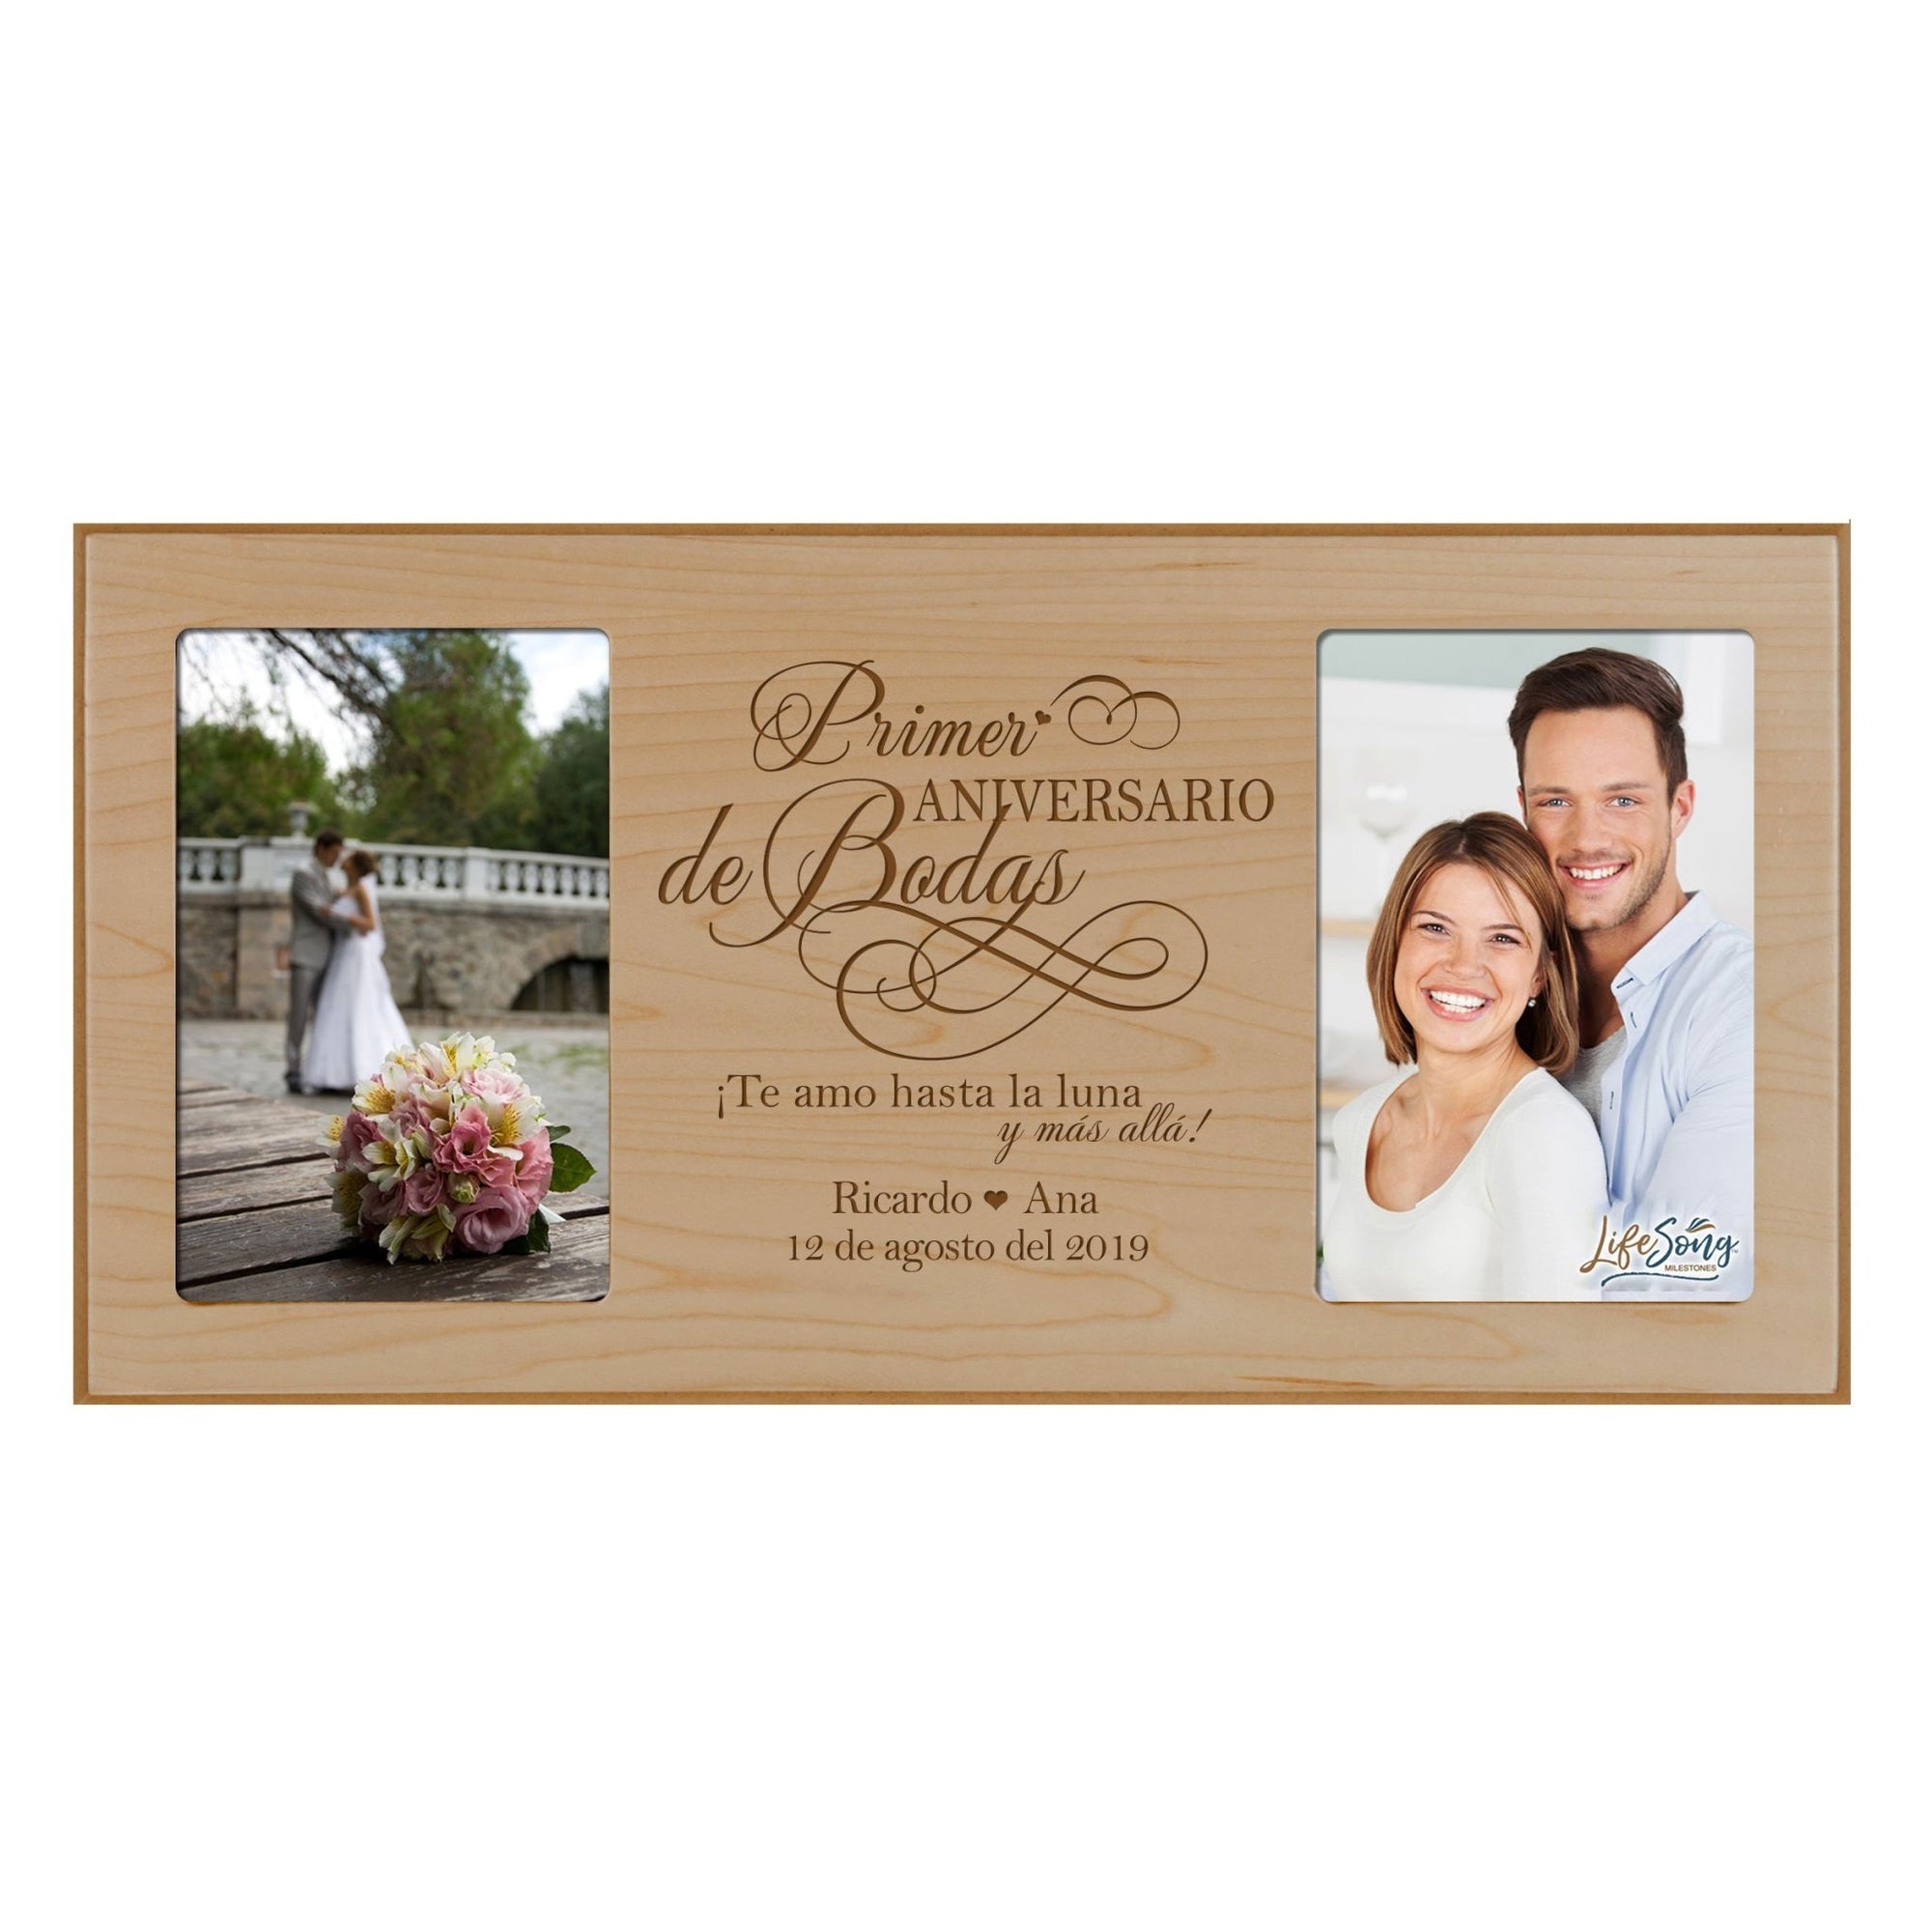 Personalized 1st Anniversary Picture Frame Holds 2-4x6 Photos (Spanish Verse) - LifeSong Milestones